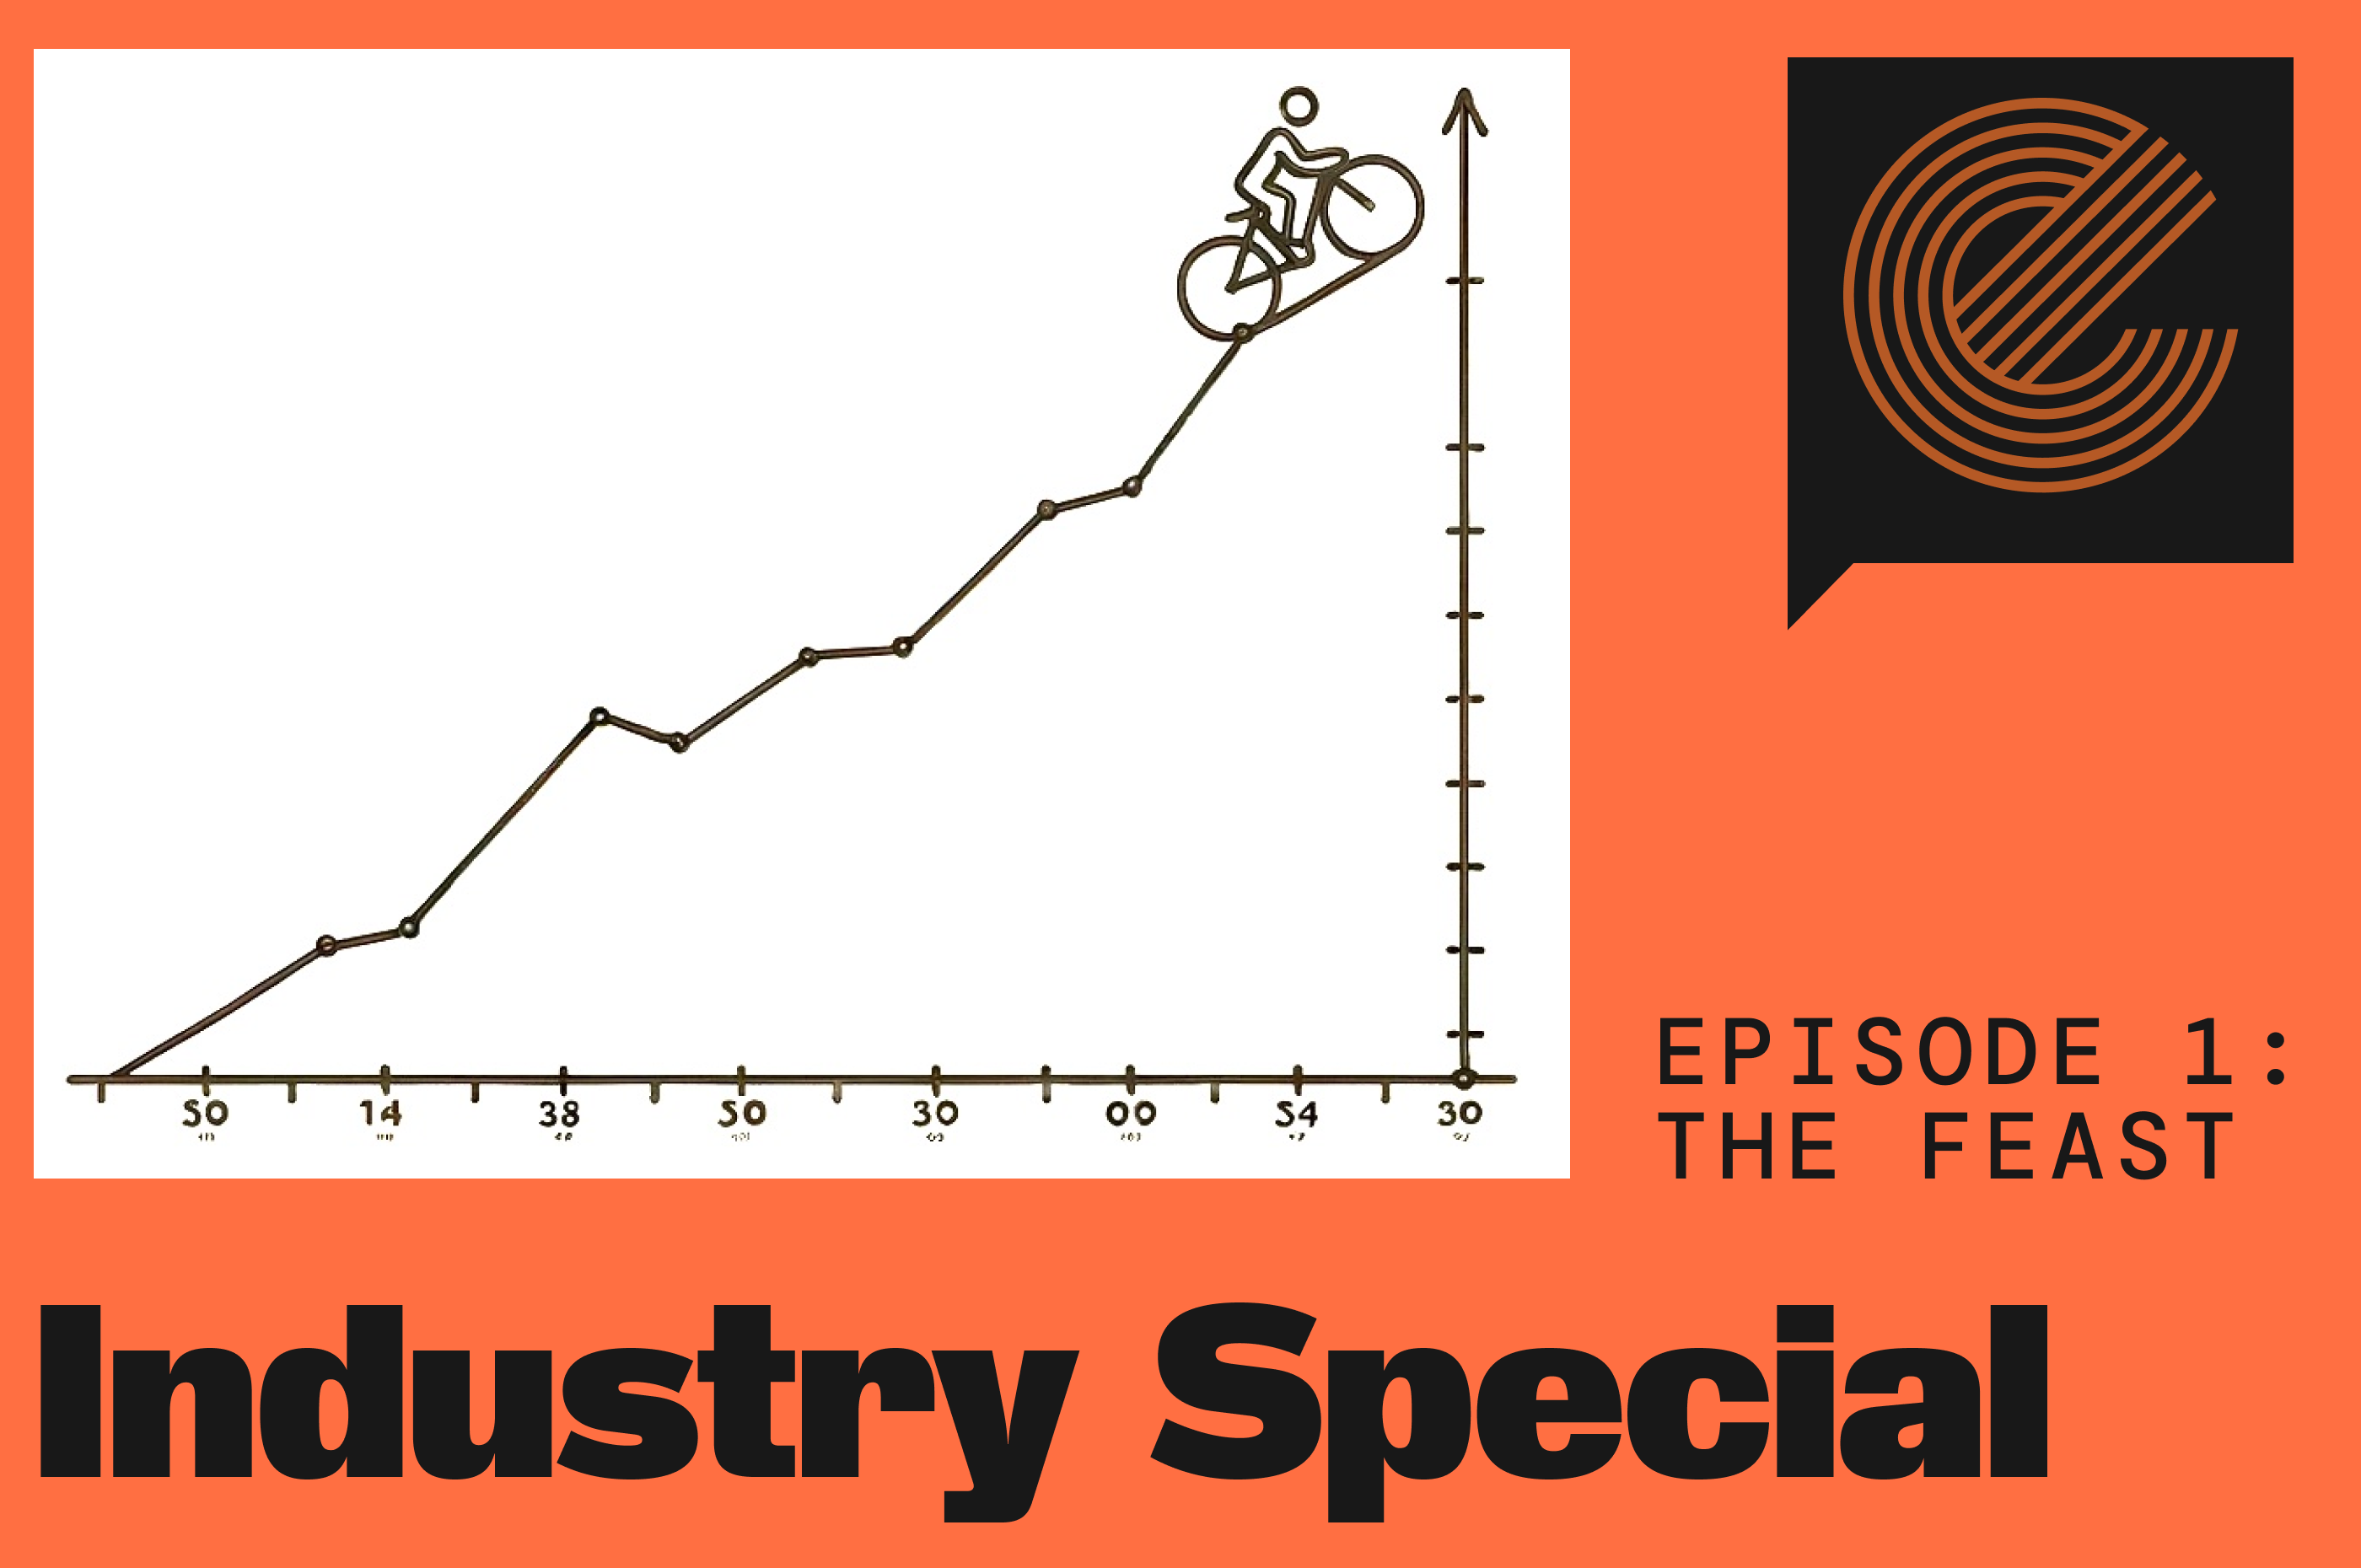 In this 4 part podcast series, I wanted to explore the events that took place that led the bike industry to the troubling point it’s at now. I spoke